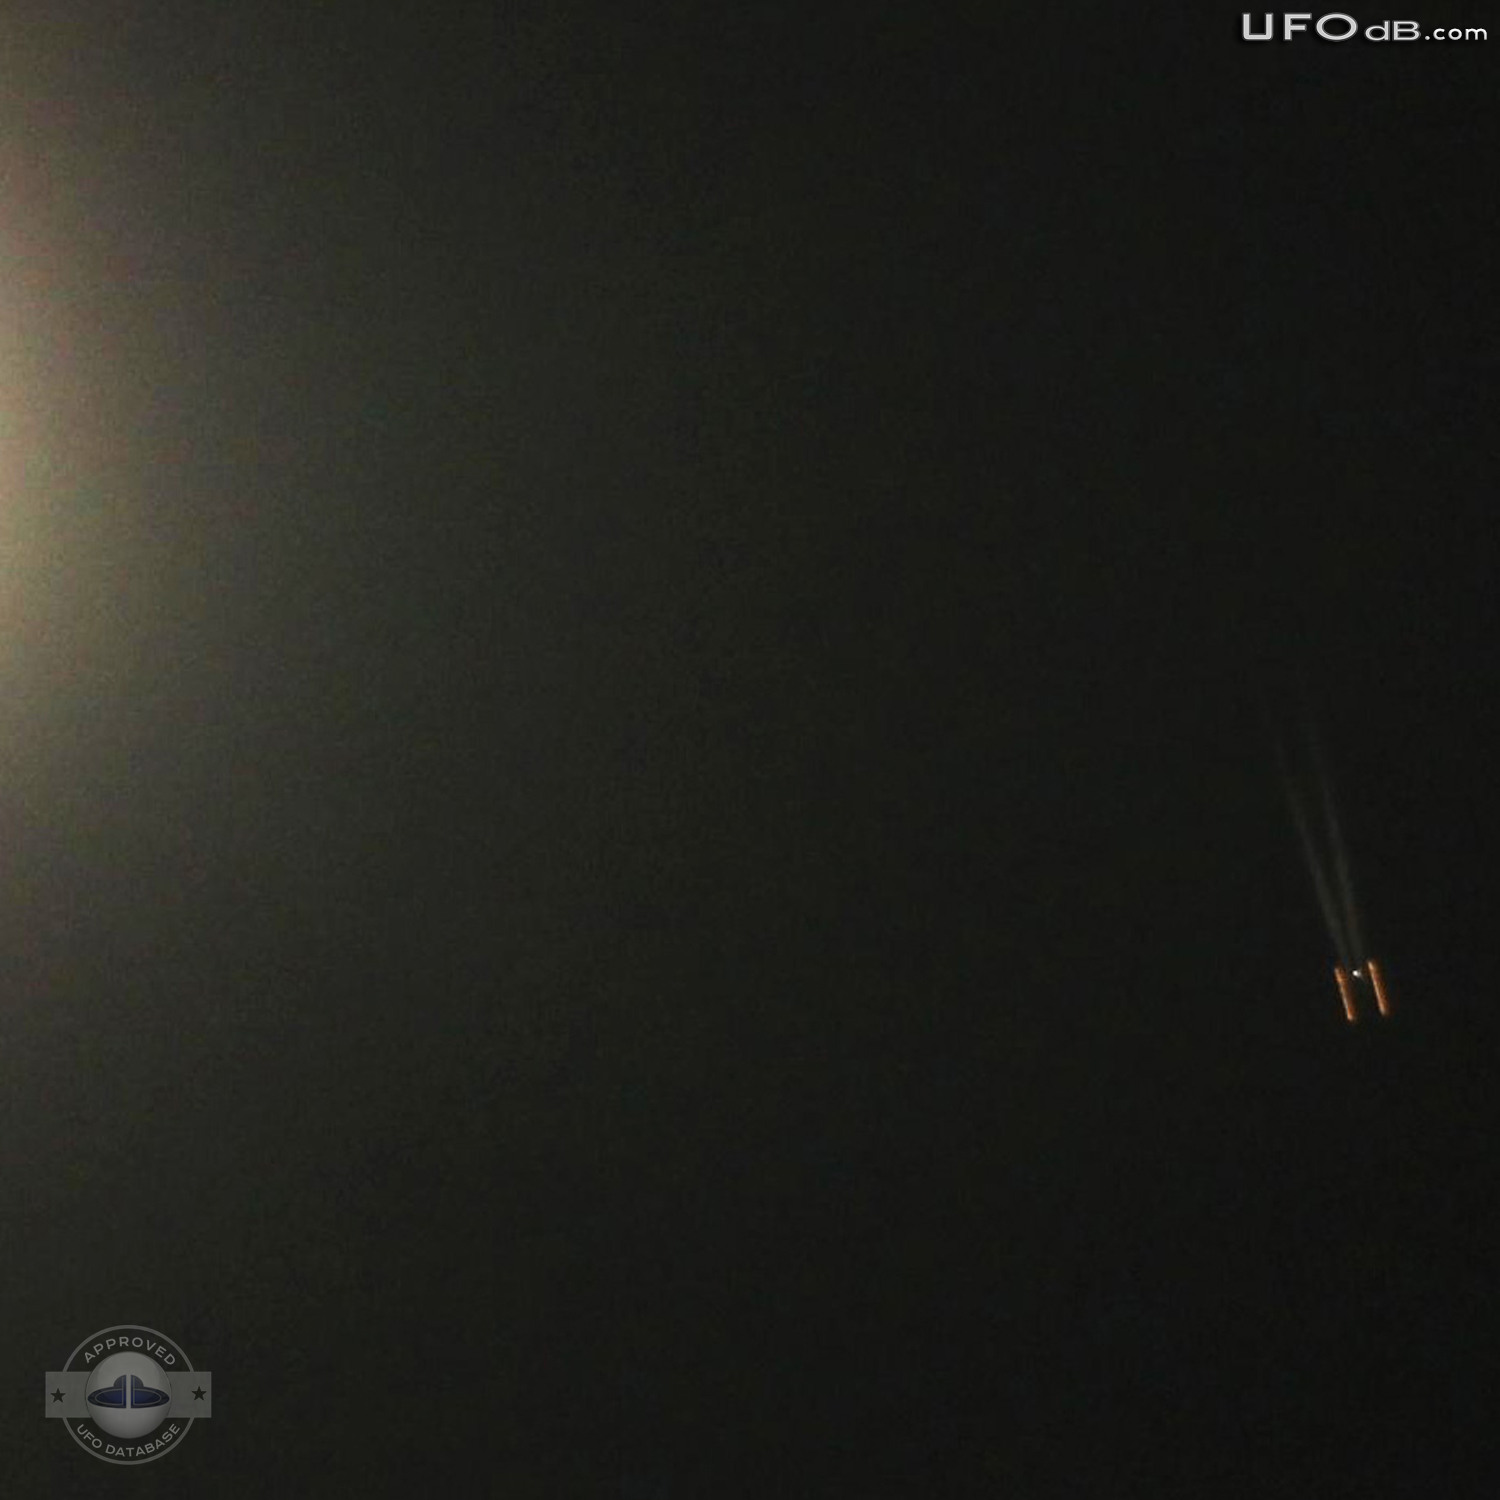 Moon picture captures a very strange shaped UFO | Louisiana USA 2011 UFO Picture #257-2